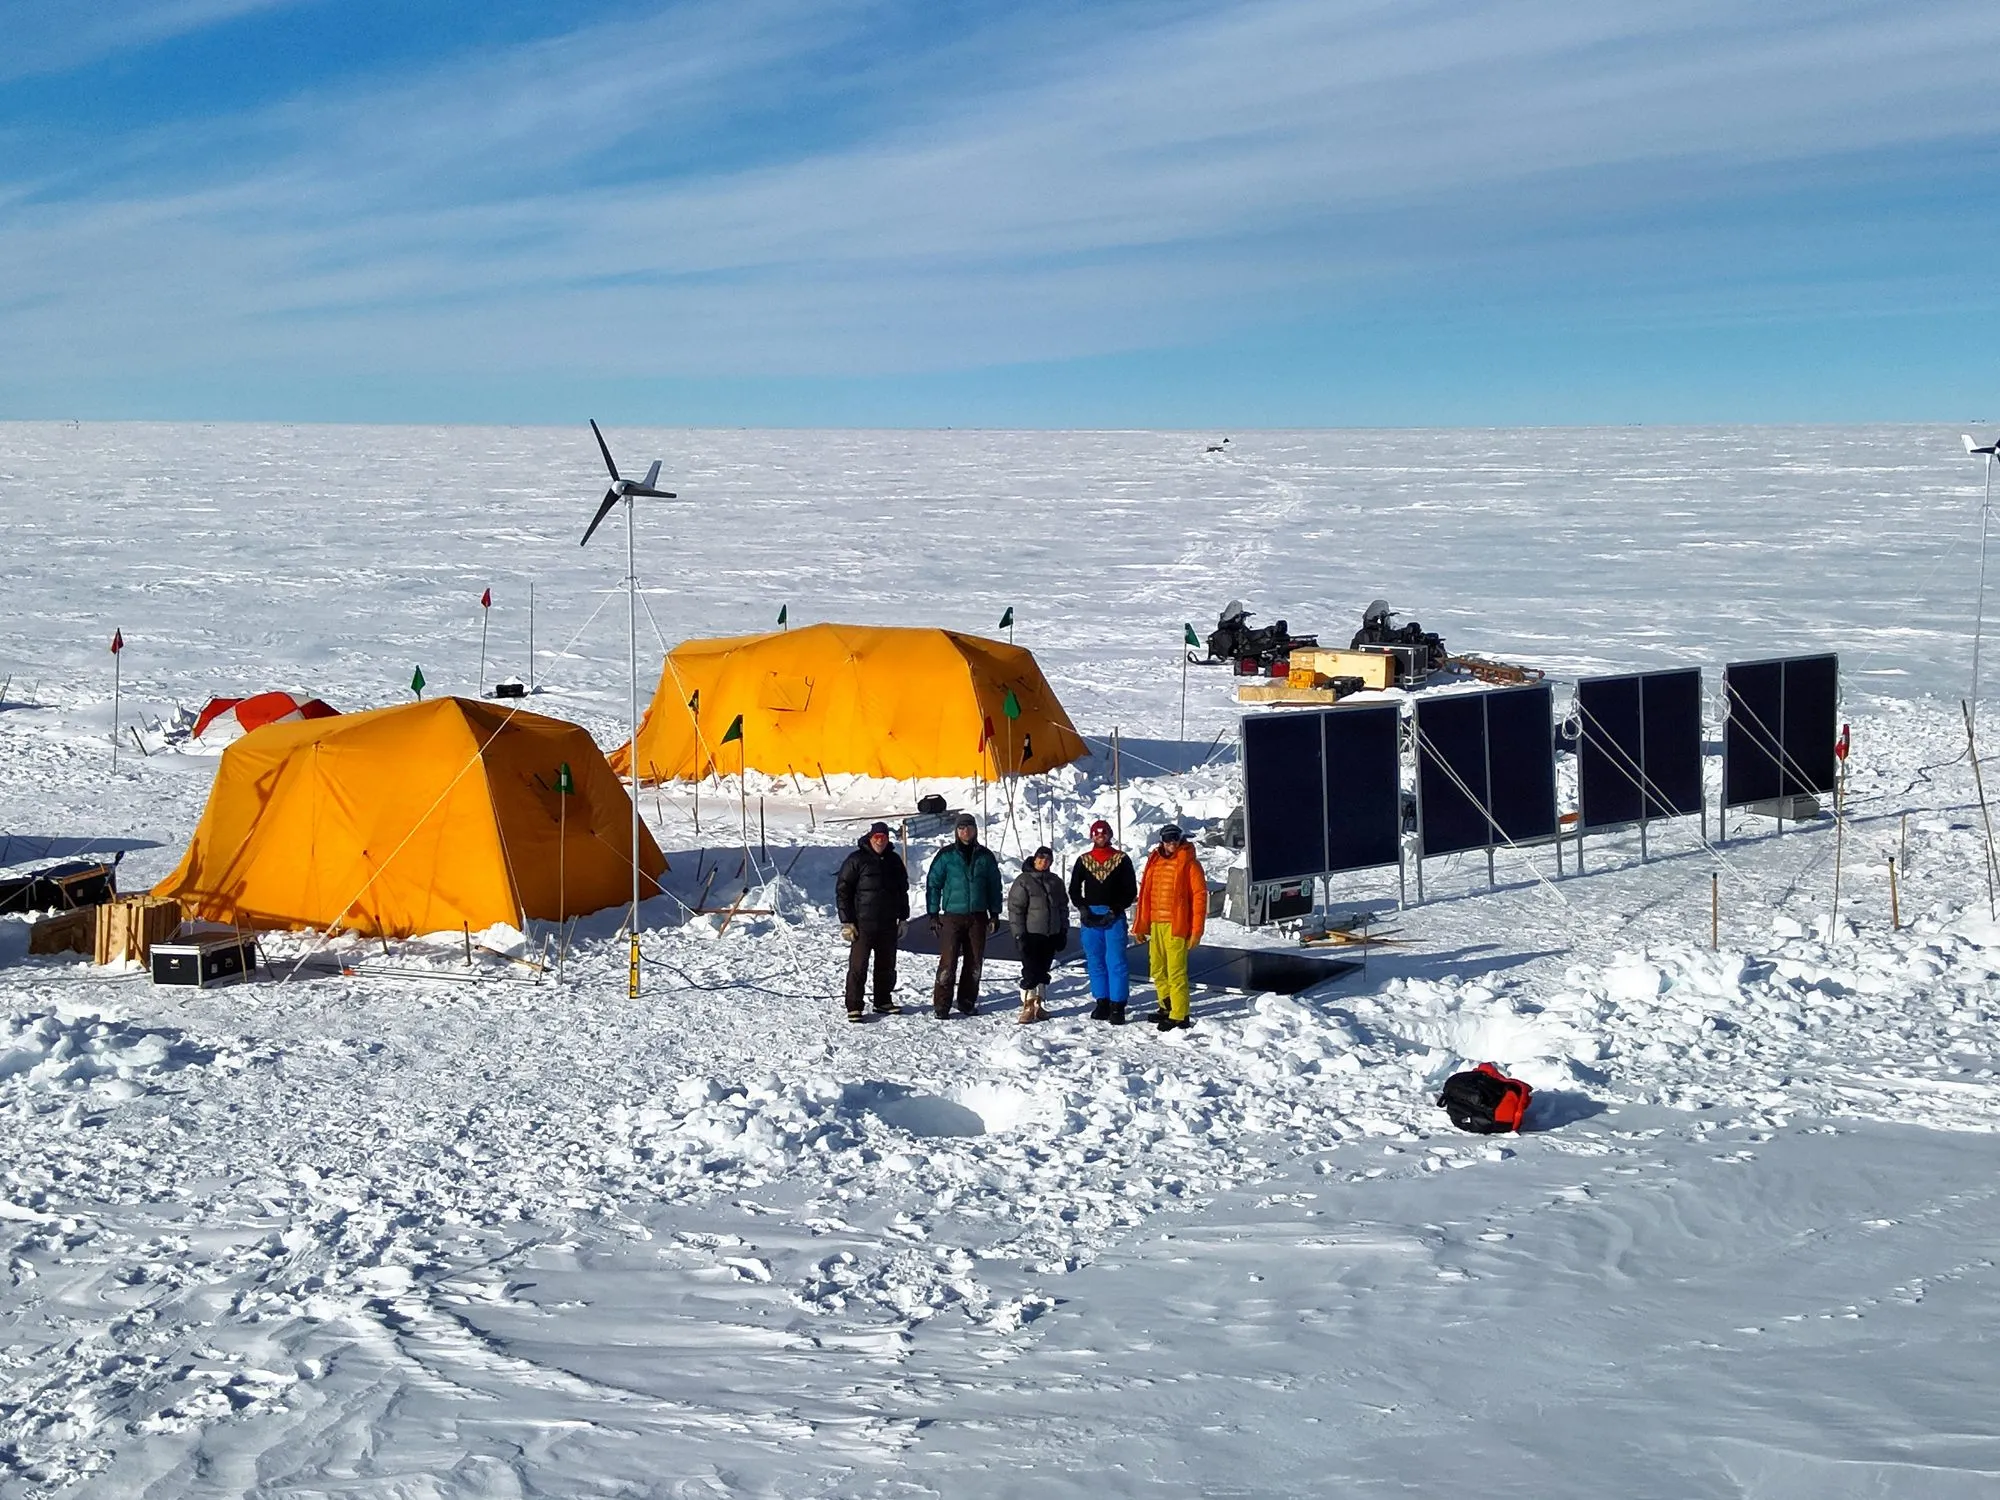 A photo of the install team in front of the camp tents, solar panels, and wind turbines, under blue sky